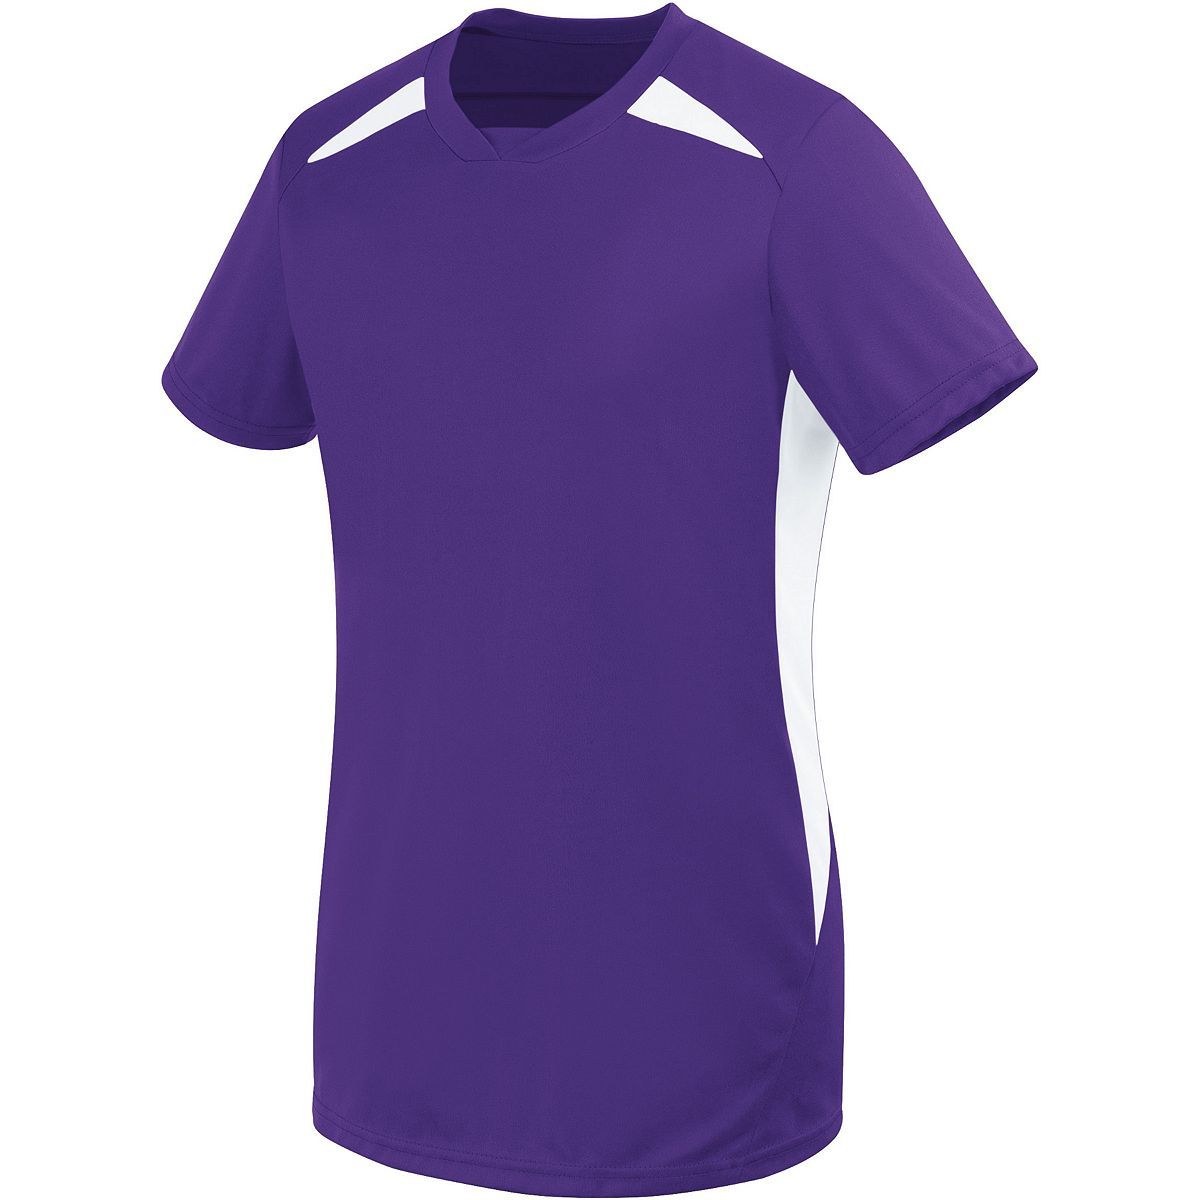 High 5 Ladies Color Cross Jersey - 342232 - Bagger Sports